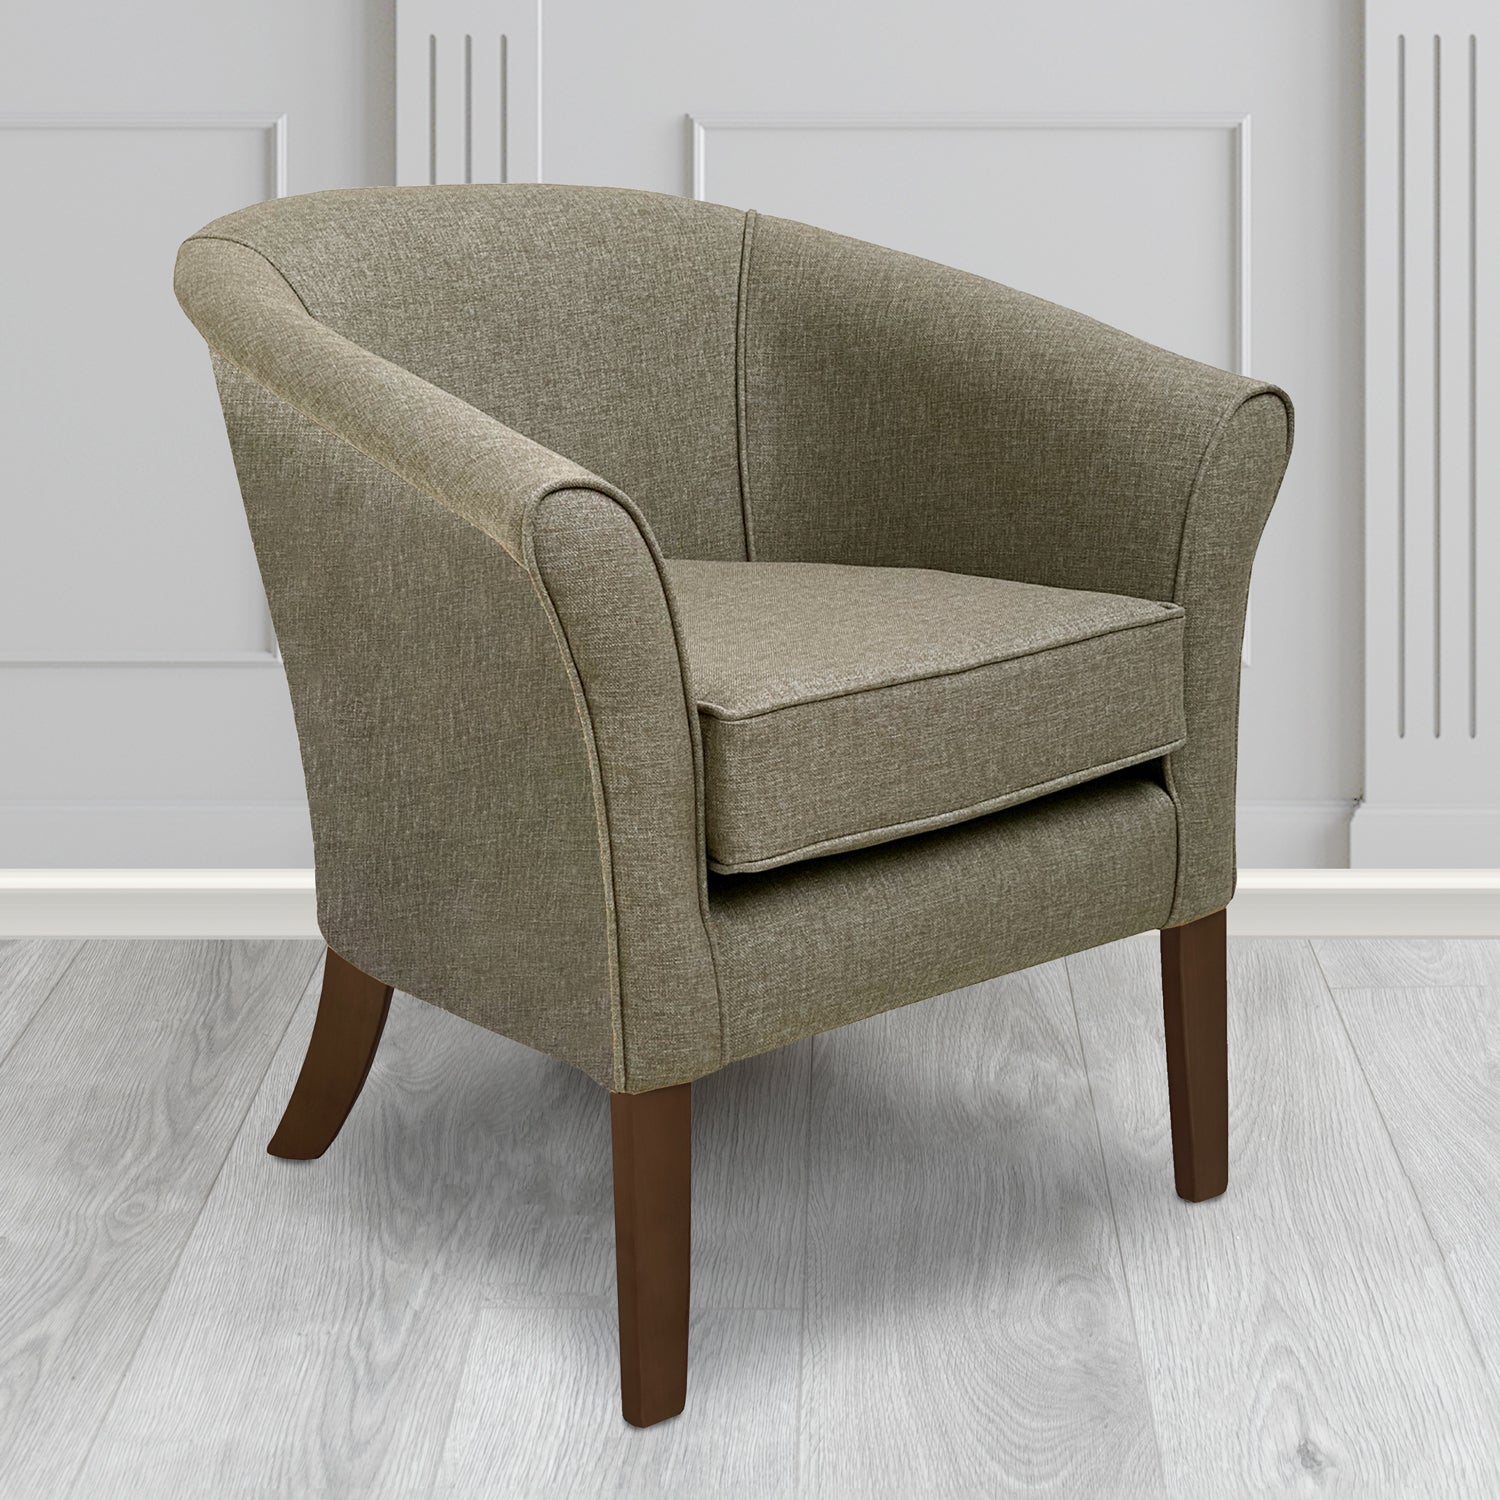 Aspen Tub Chair in Marna 835 Hessian Crib 5 Fabric - Antimicrobial, Stain Resistant & Waterproof - The Tub Chair Shop